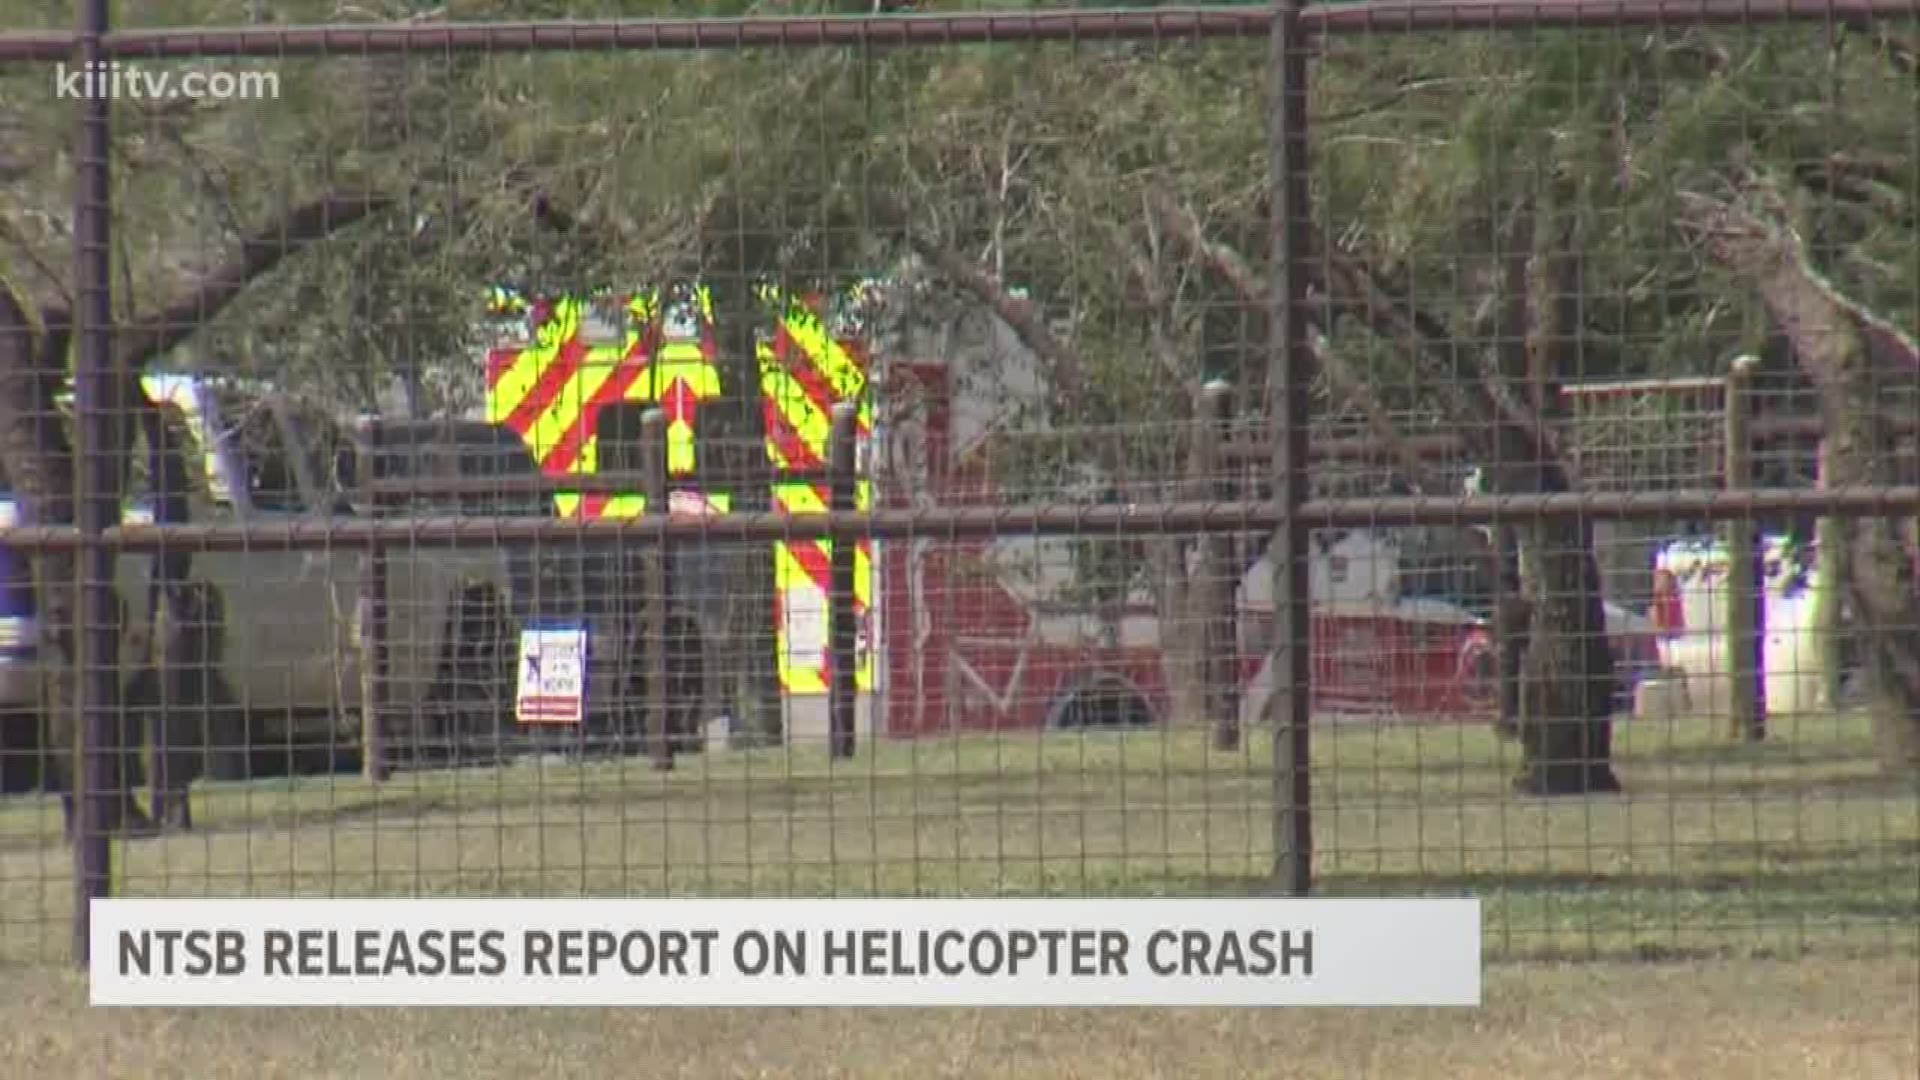 According to the NTSB's preliminary report, the two Robinson R22 helicopters collided in mid-air at around 8:45 a.m. Wednesday, Oct. 23.